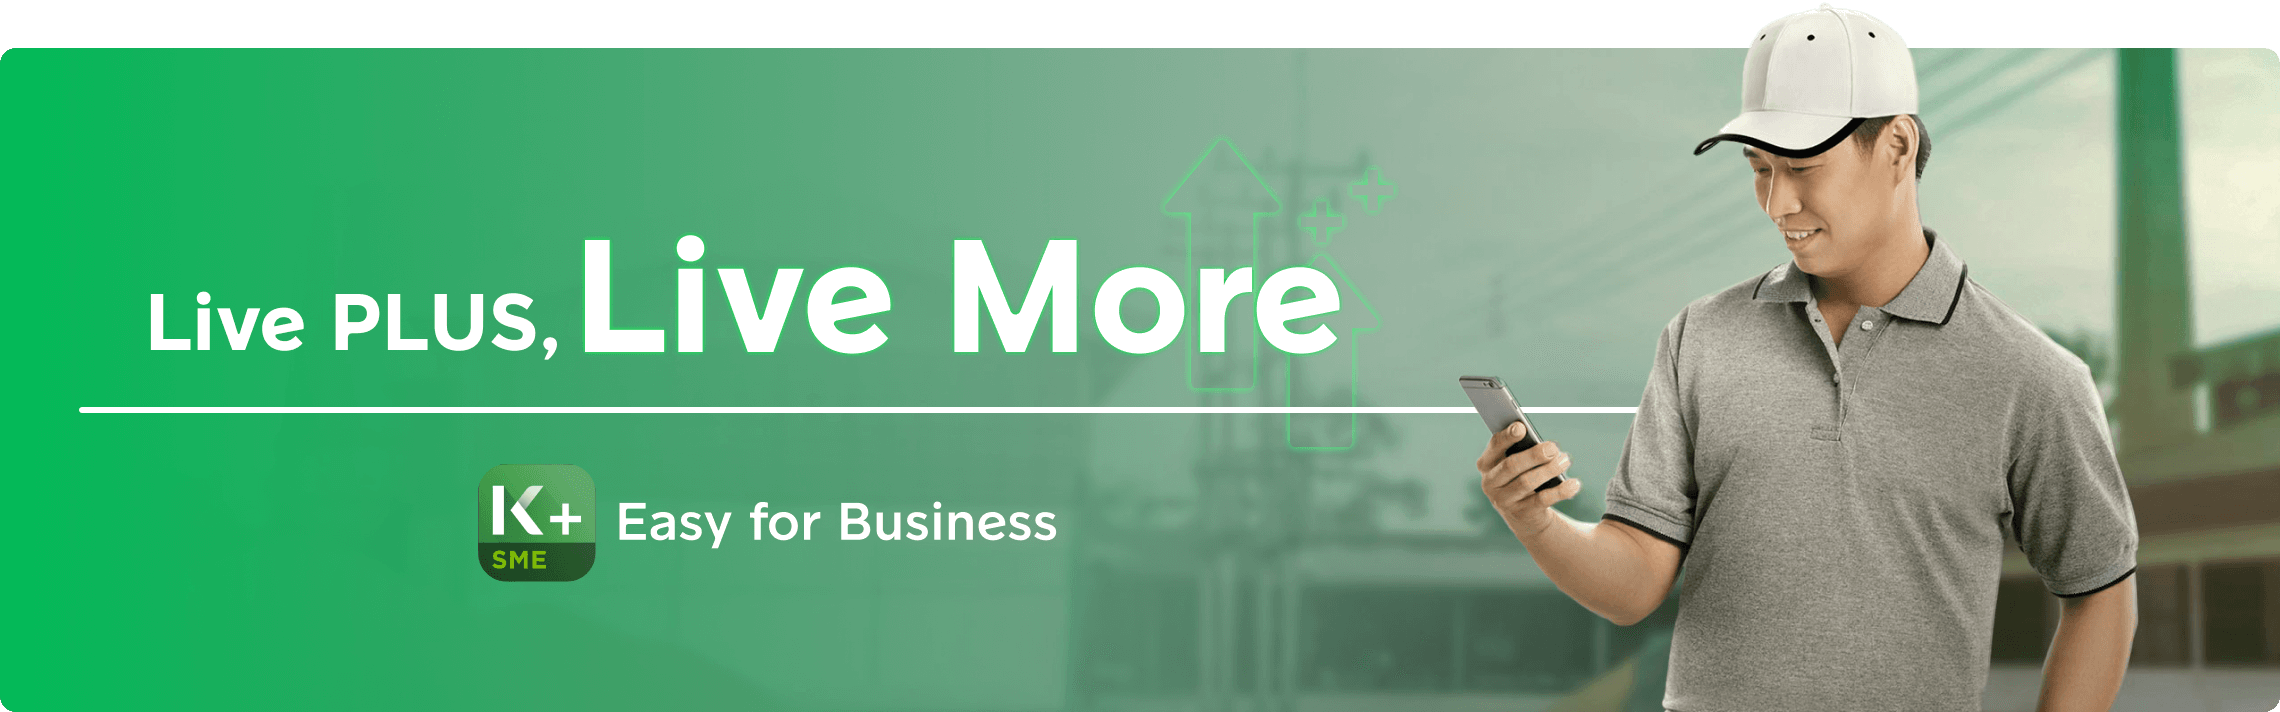 Live PLUS, Live More Easy for Business